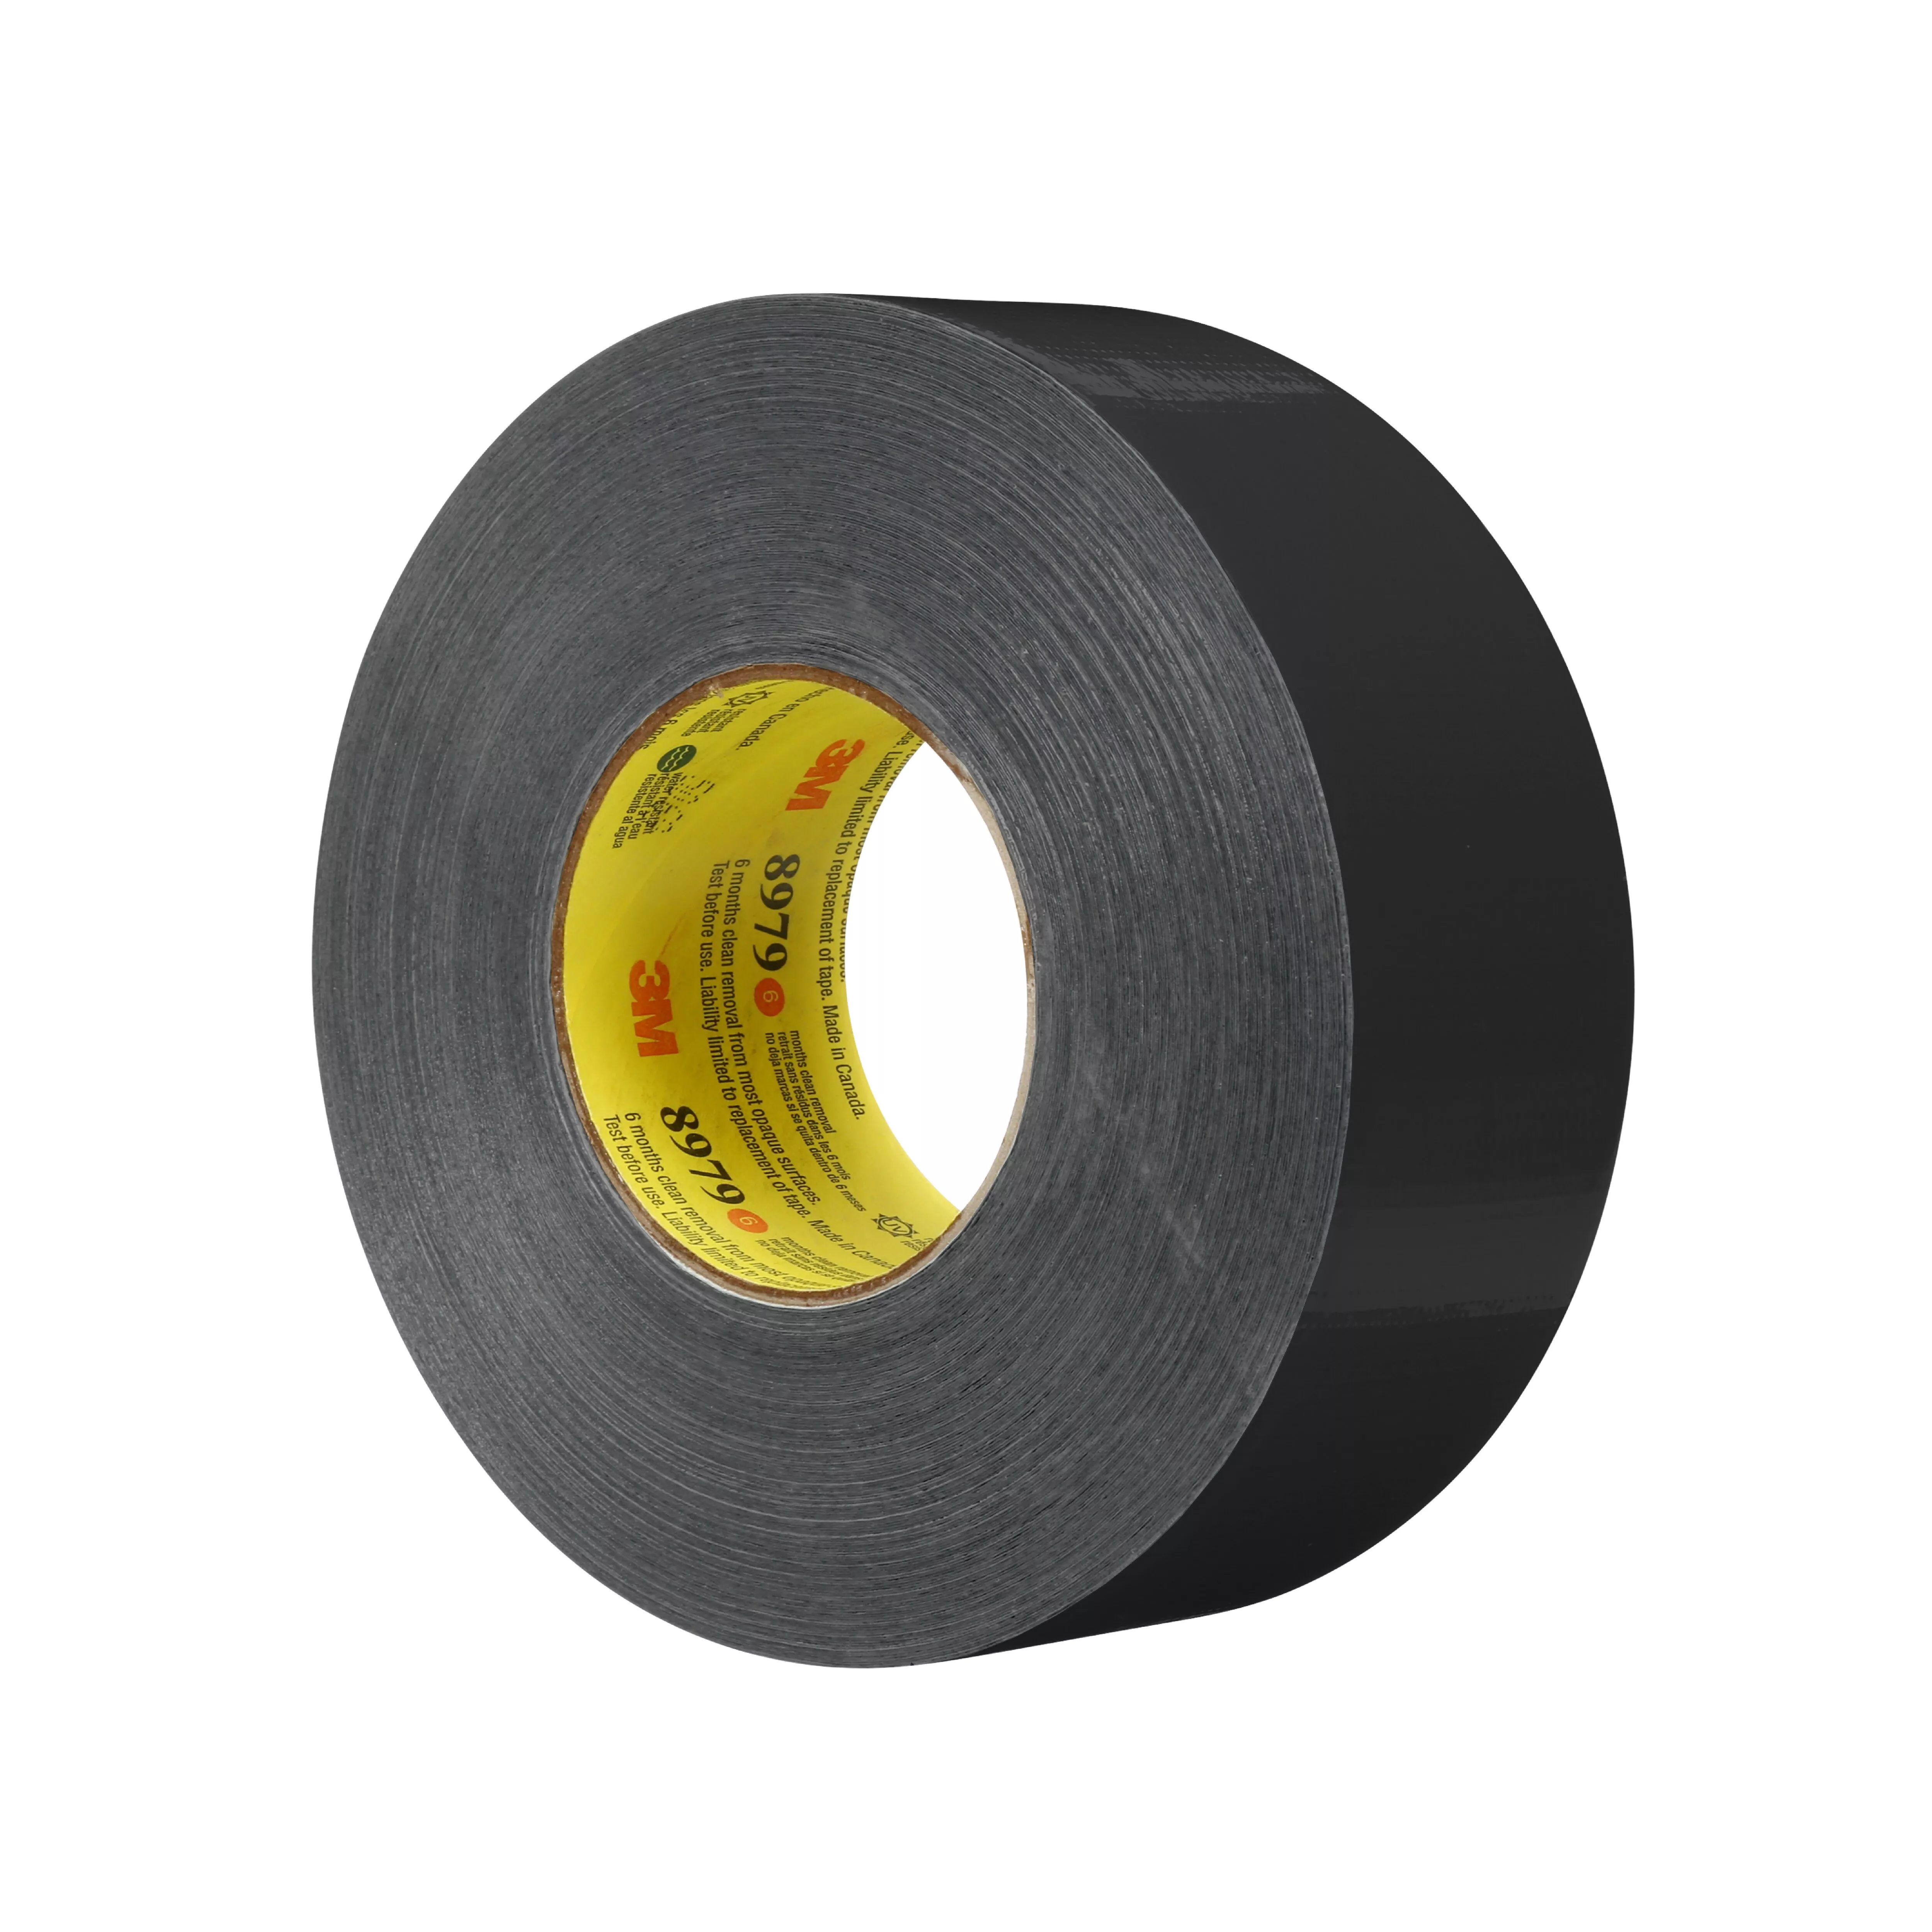 Product Number 8979 | 3M™ Performance Plus Duct Tape 8979